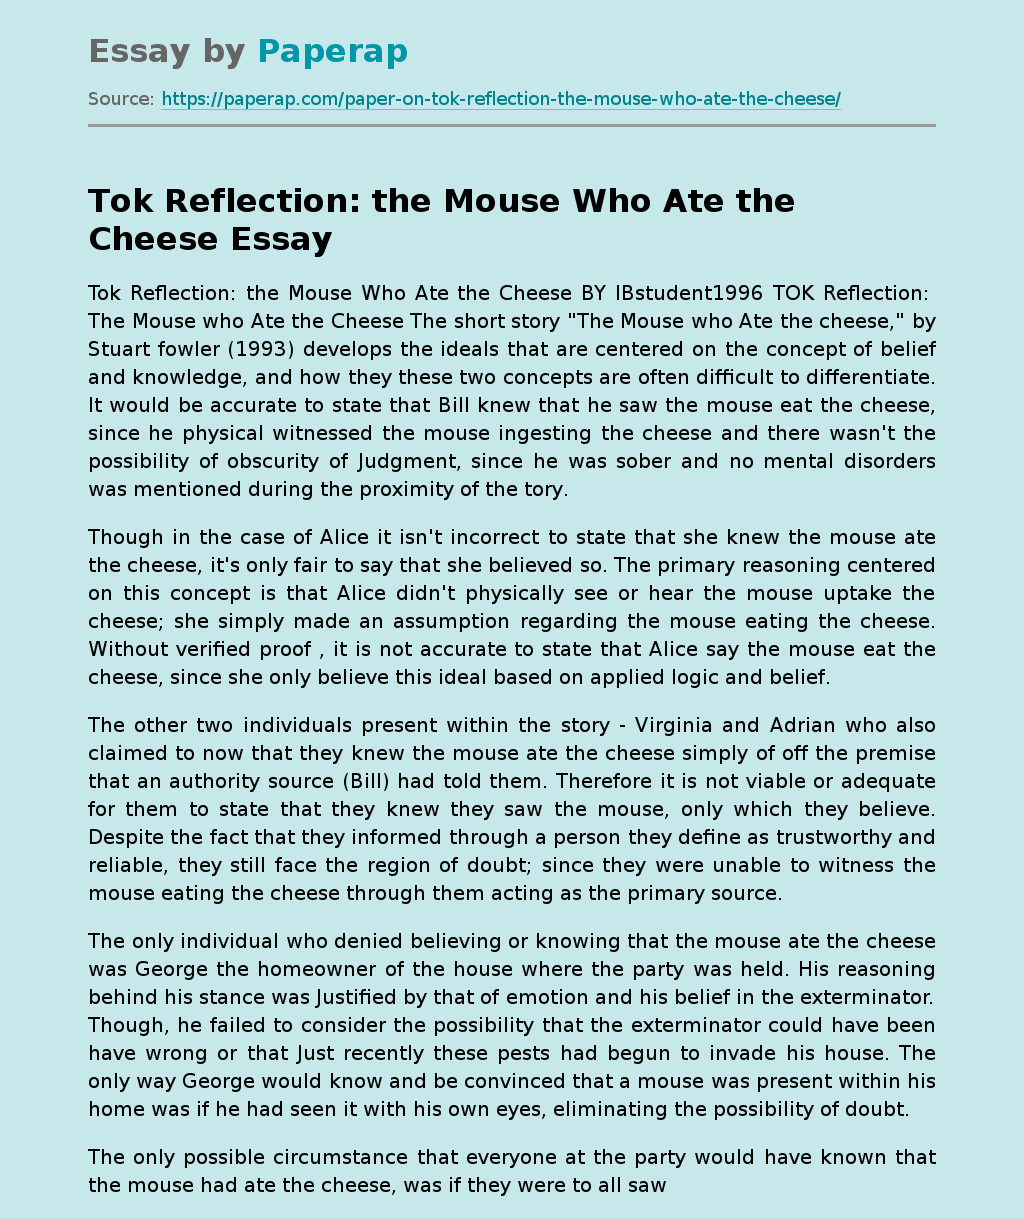 Tok Reflection: the Mouse Who Ate the Cheese